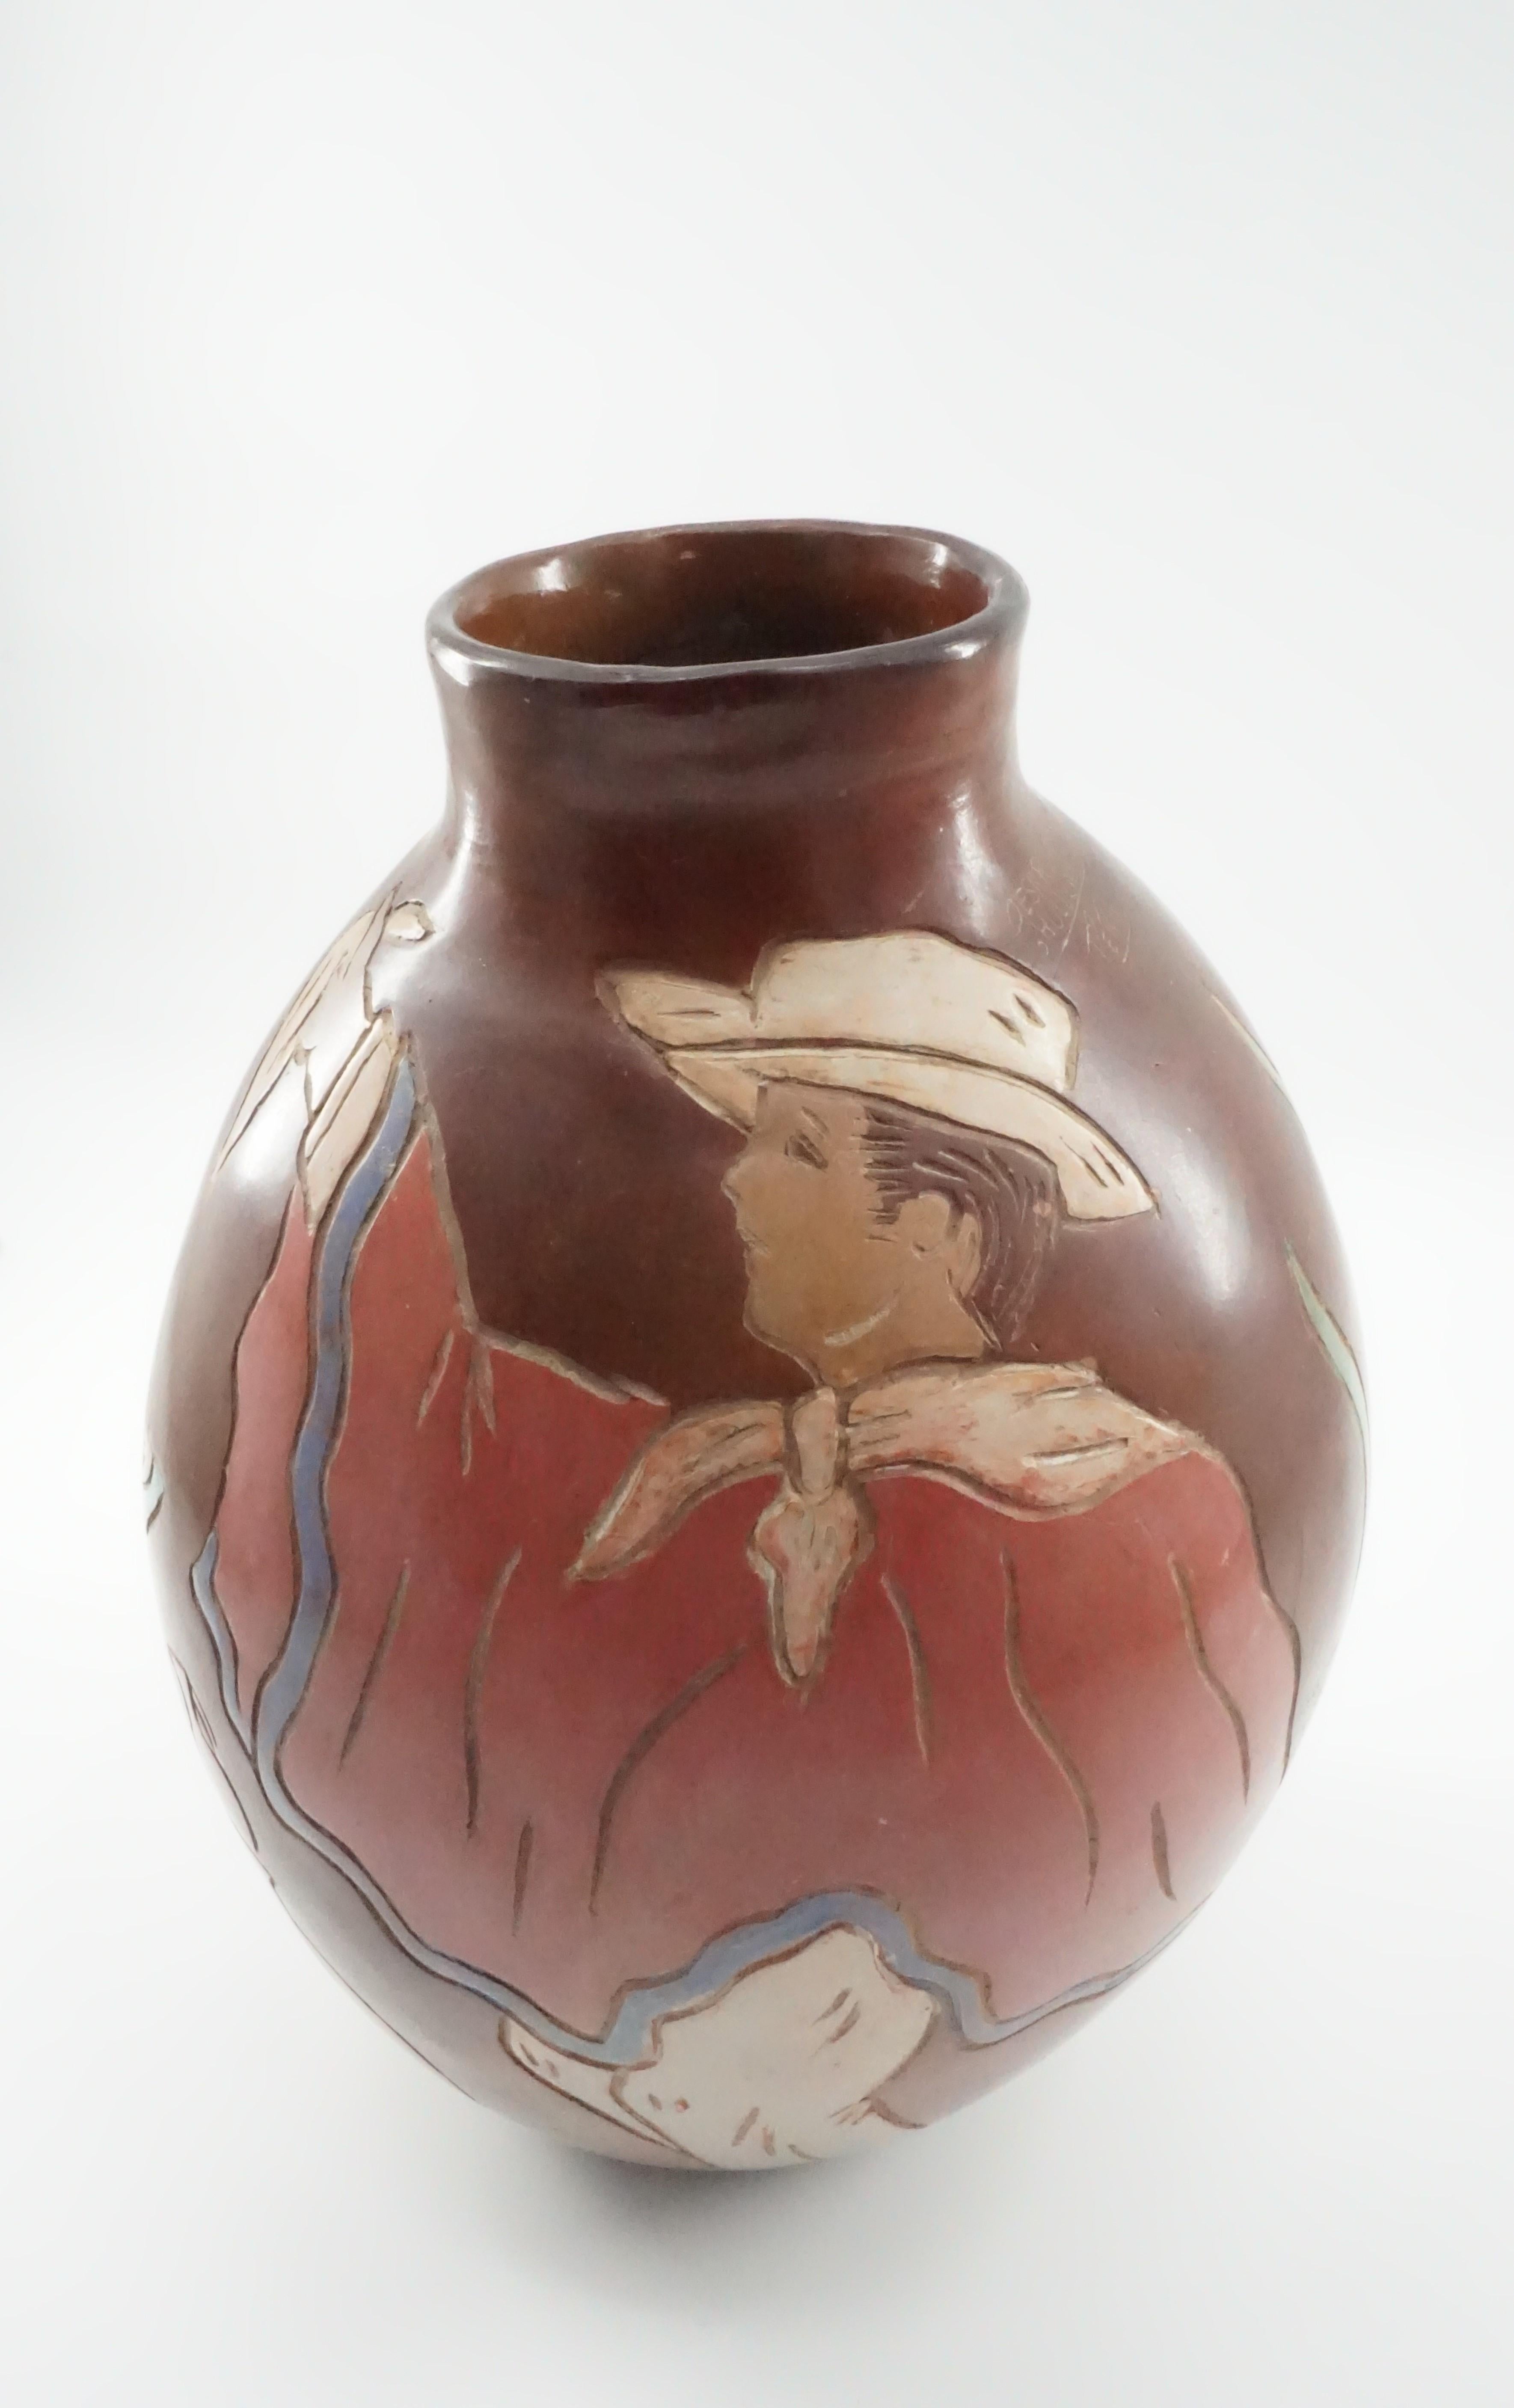 Peruvian Vase, Ceramic Vessel, Hand Crafted, Brown, From Peru, Brown Tones, C 1950 For Sale